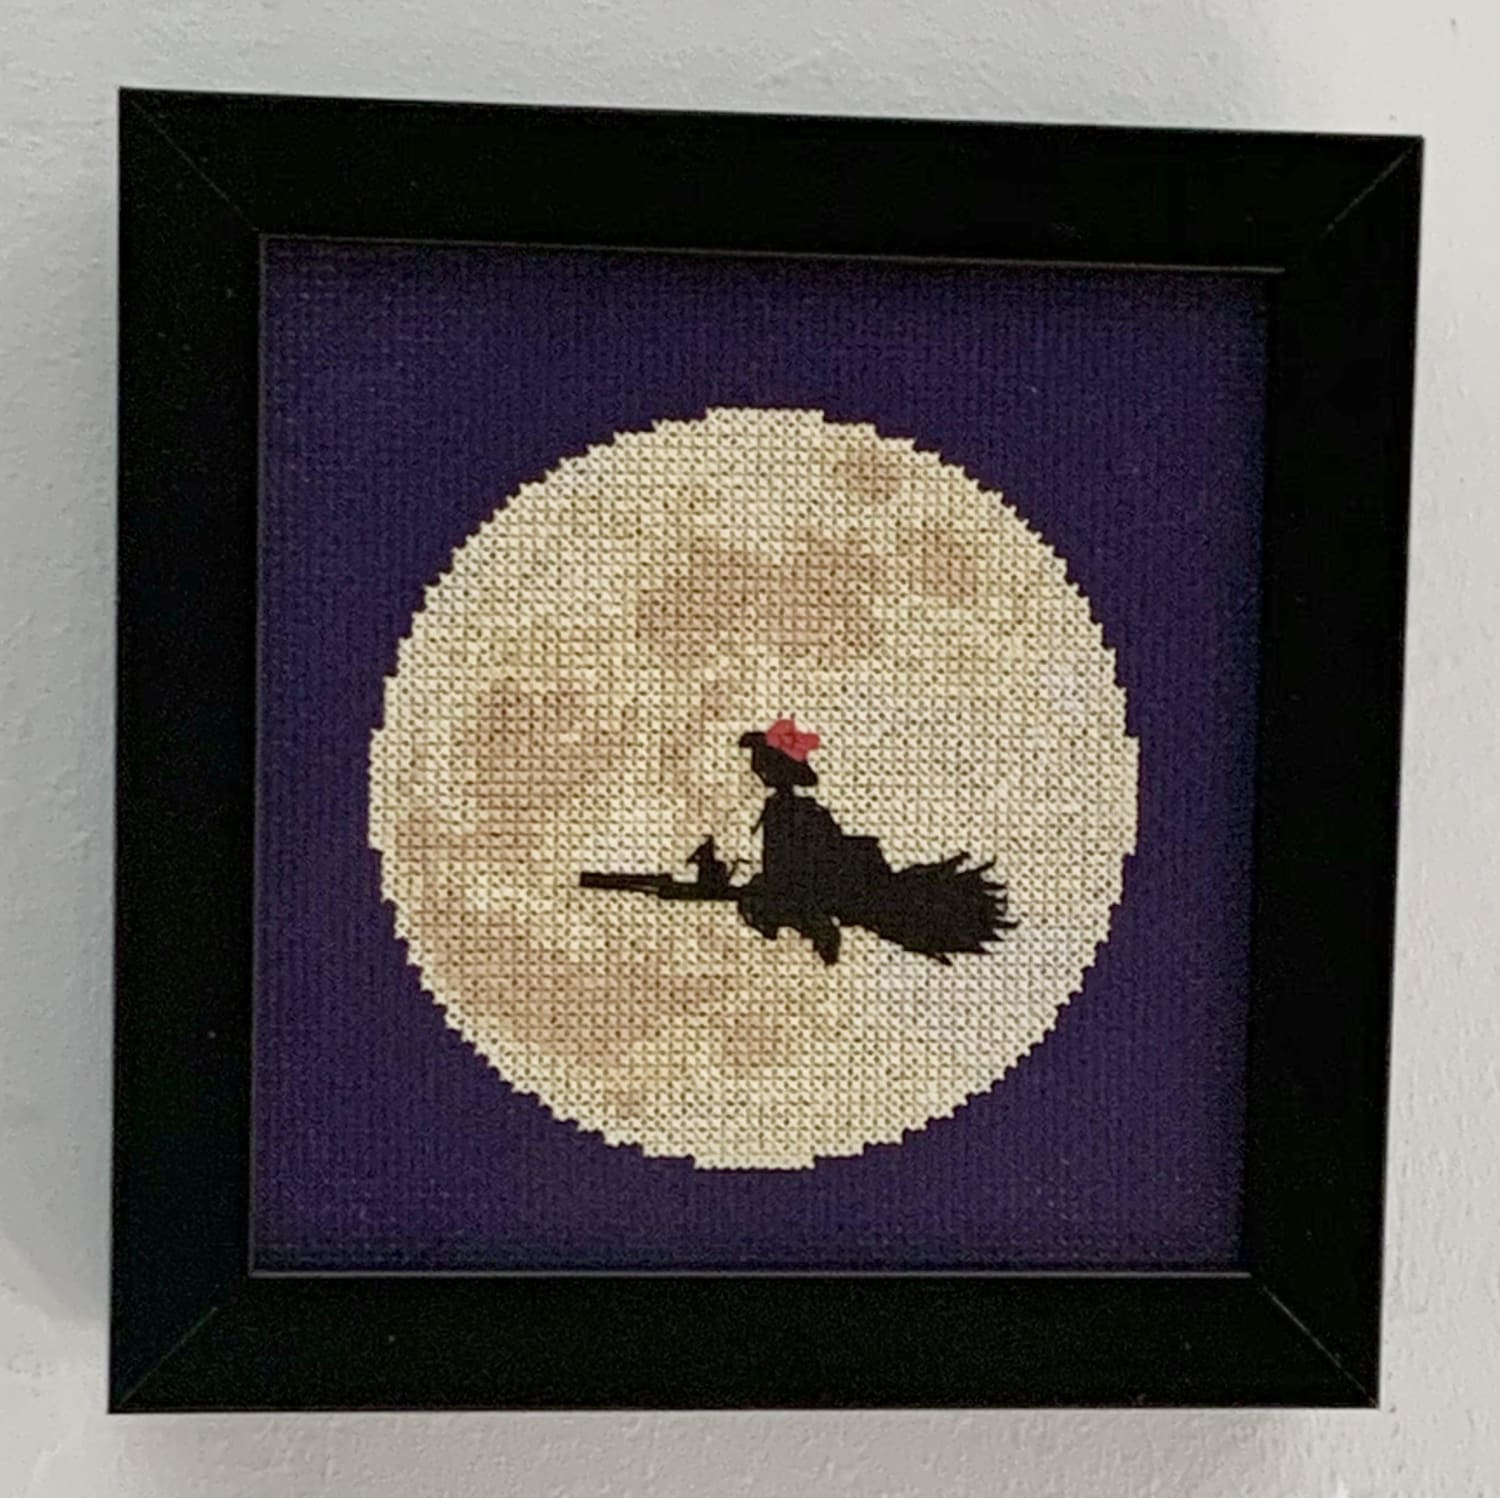 [FO] Starting the Witchy Season early!